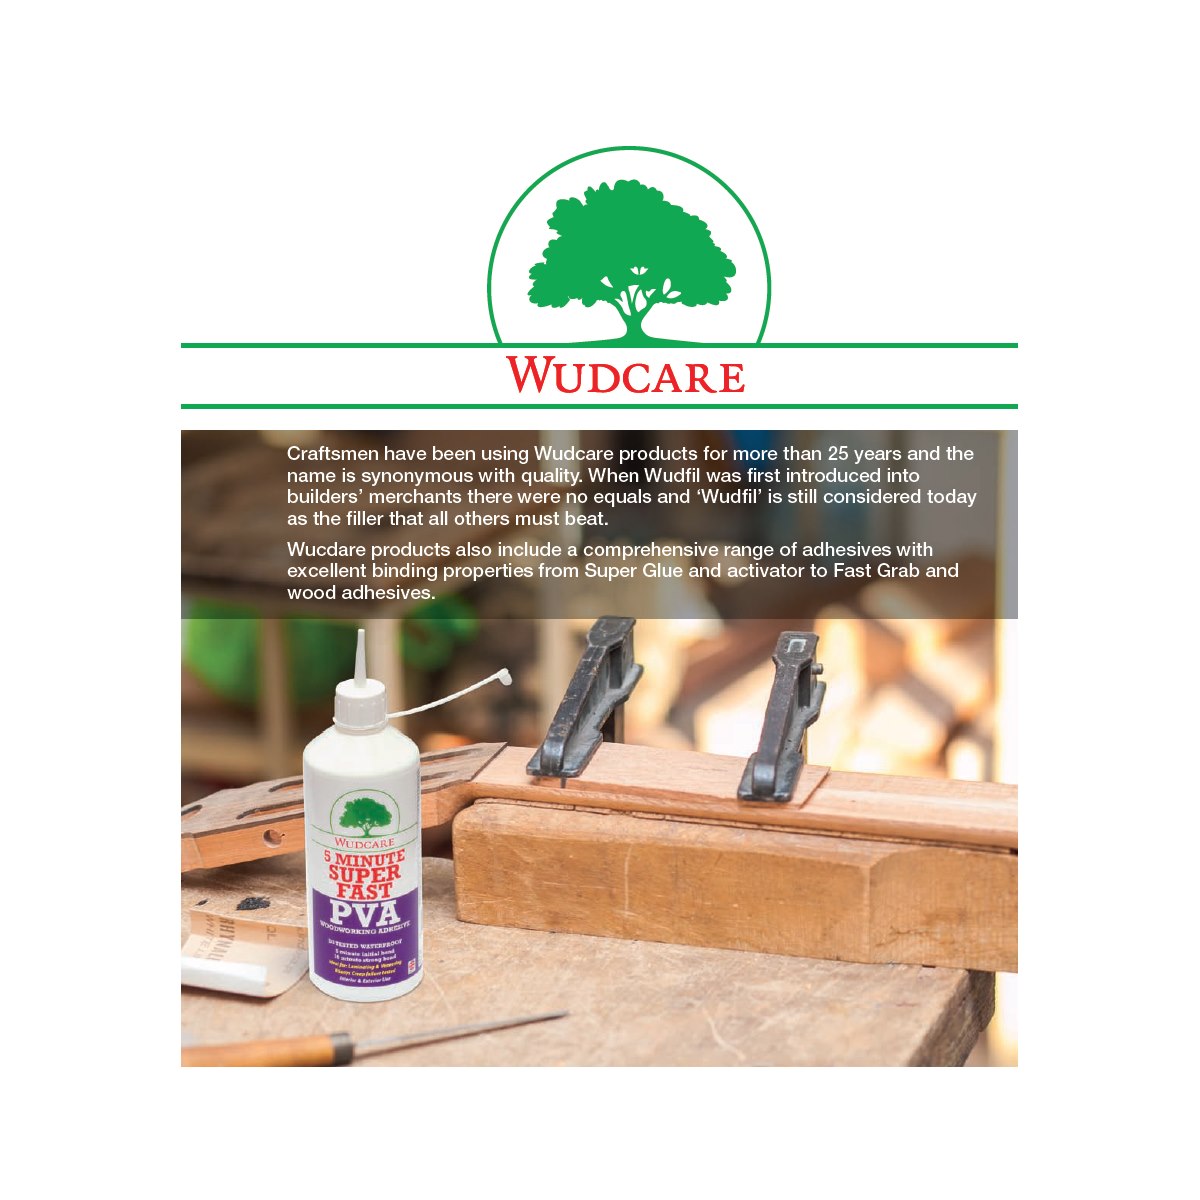 Where to buy Wudcare Adhesives